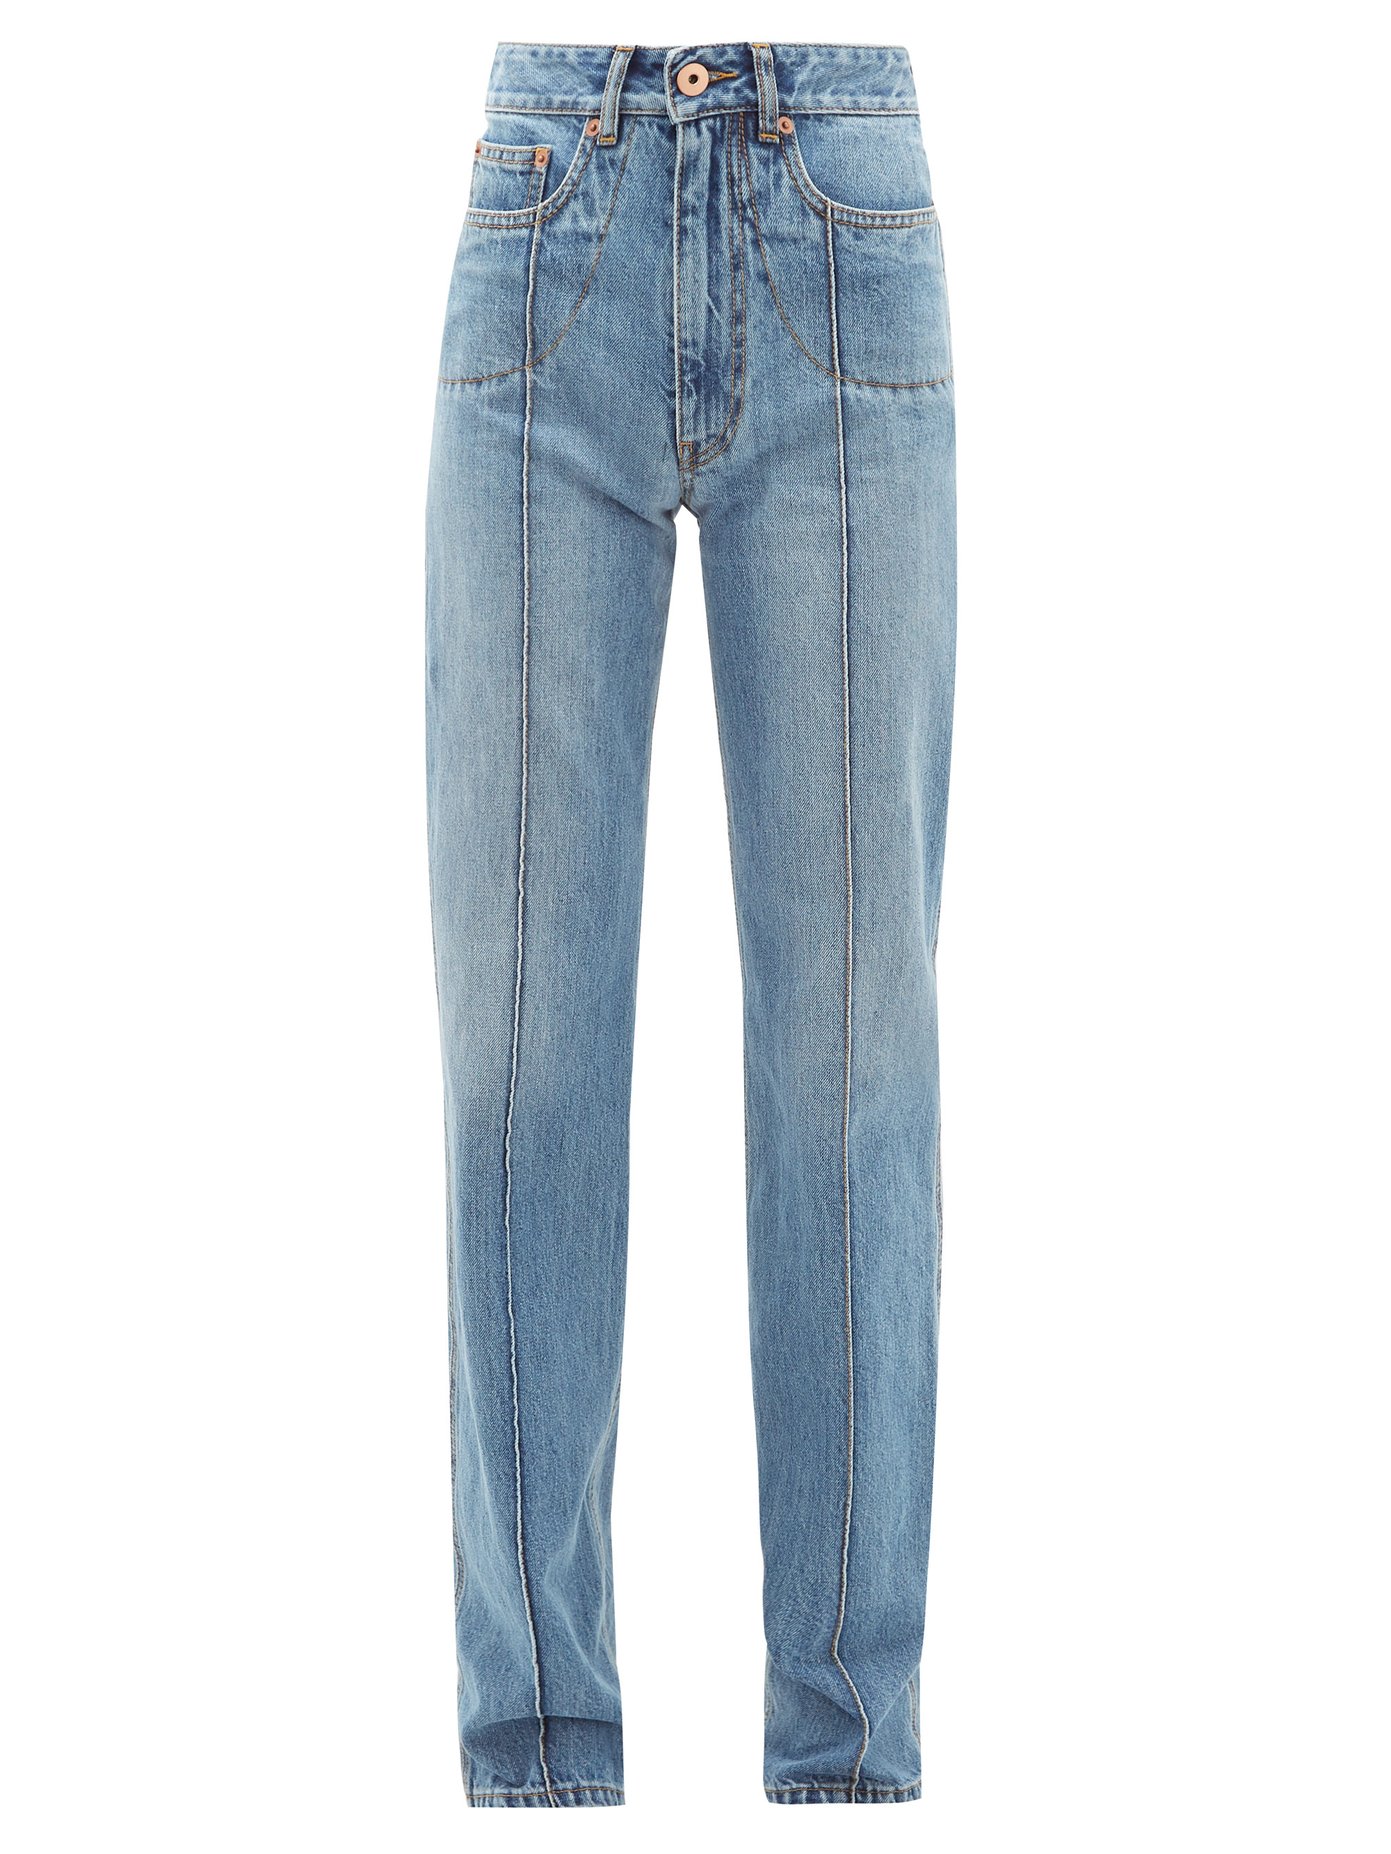 jeans at